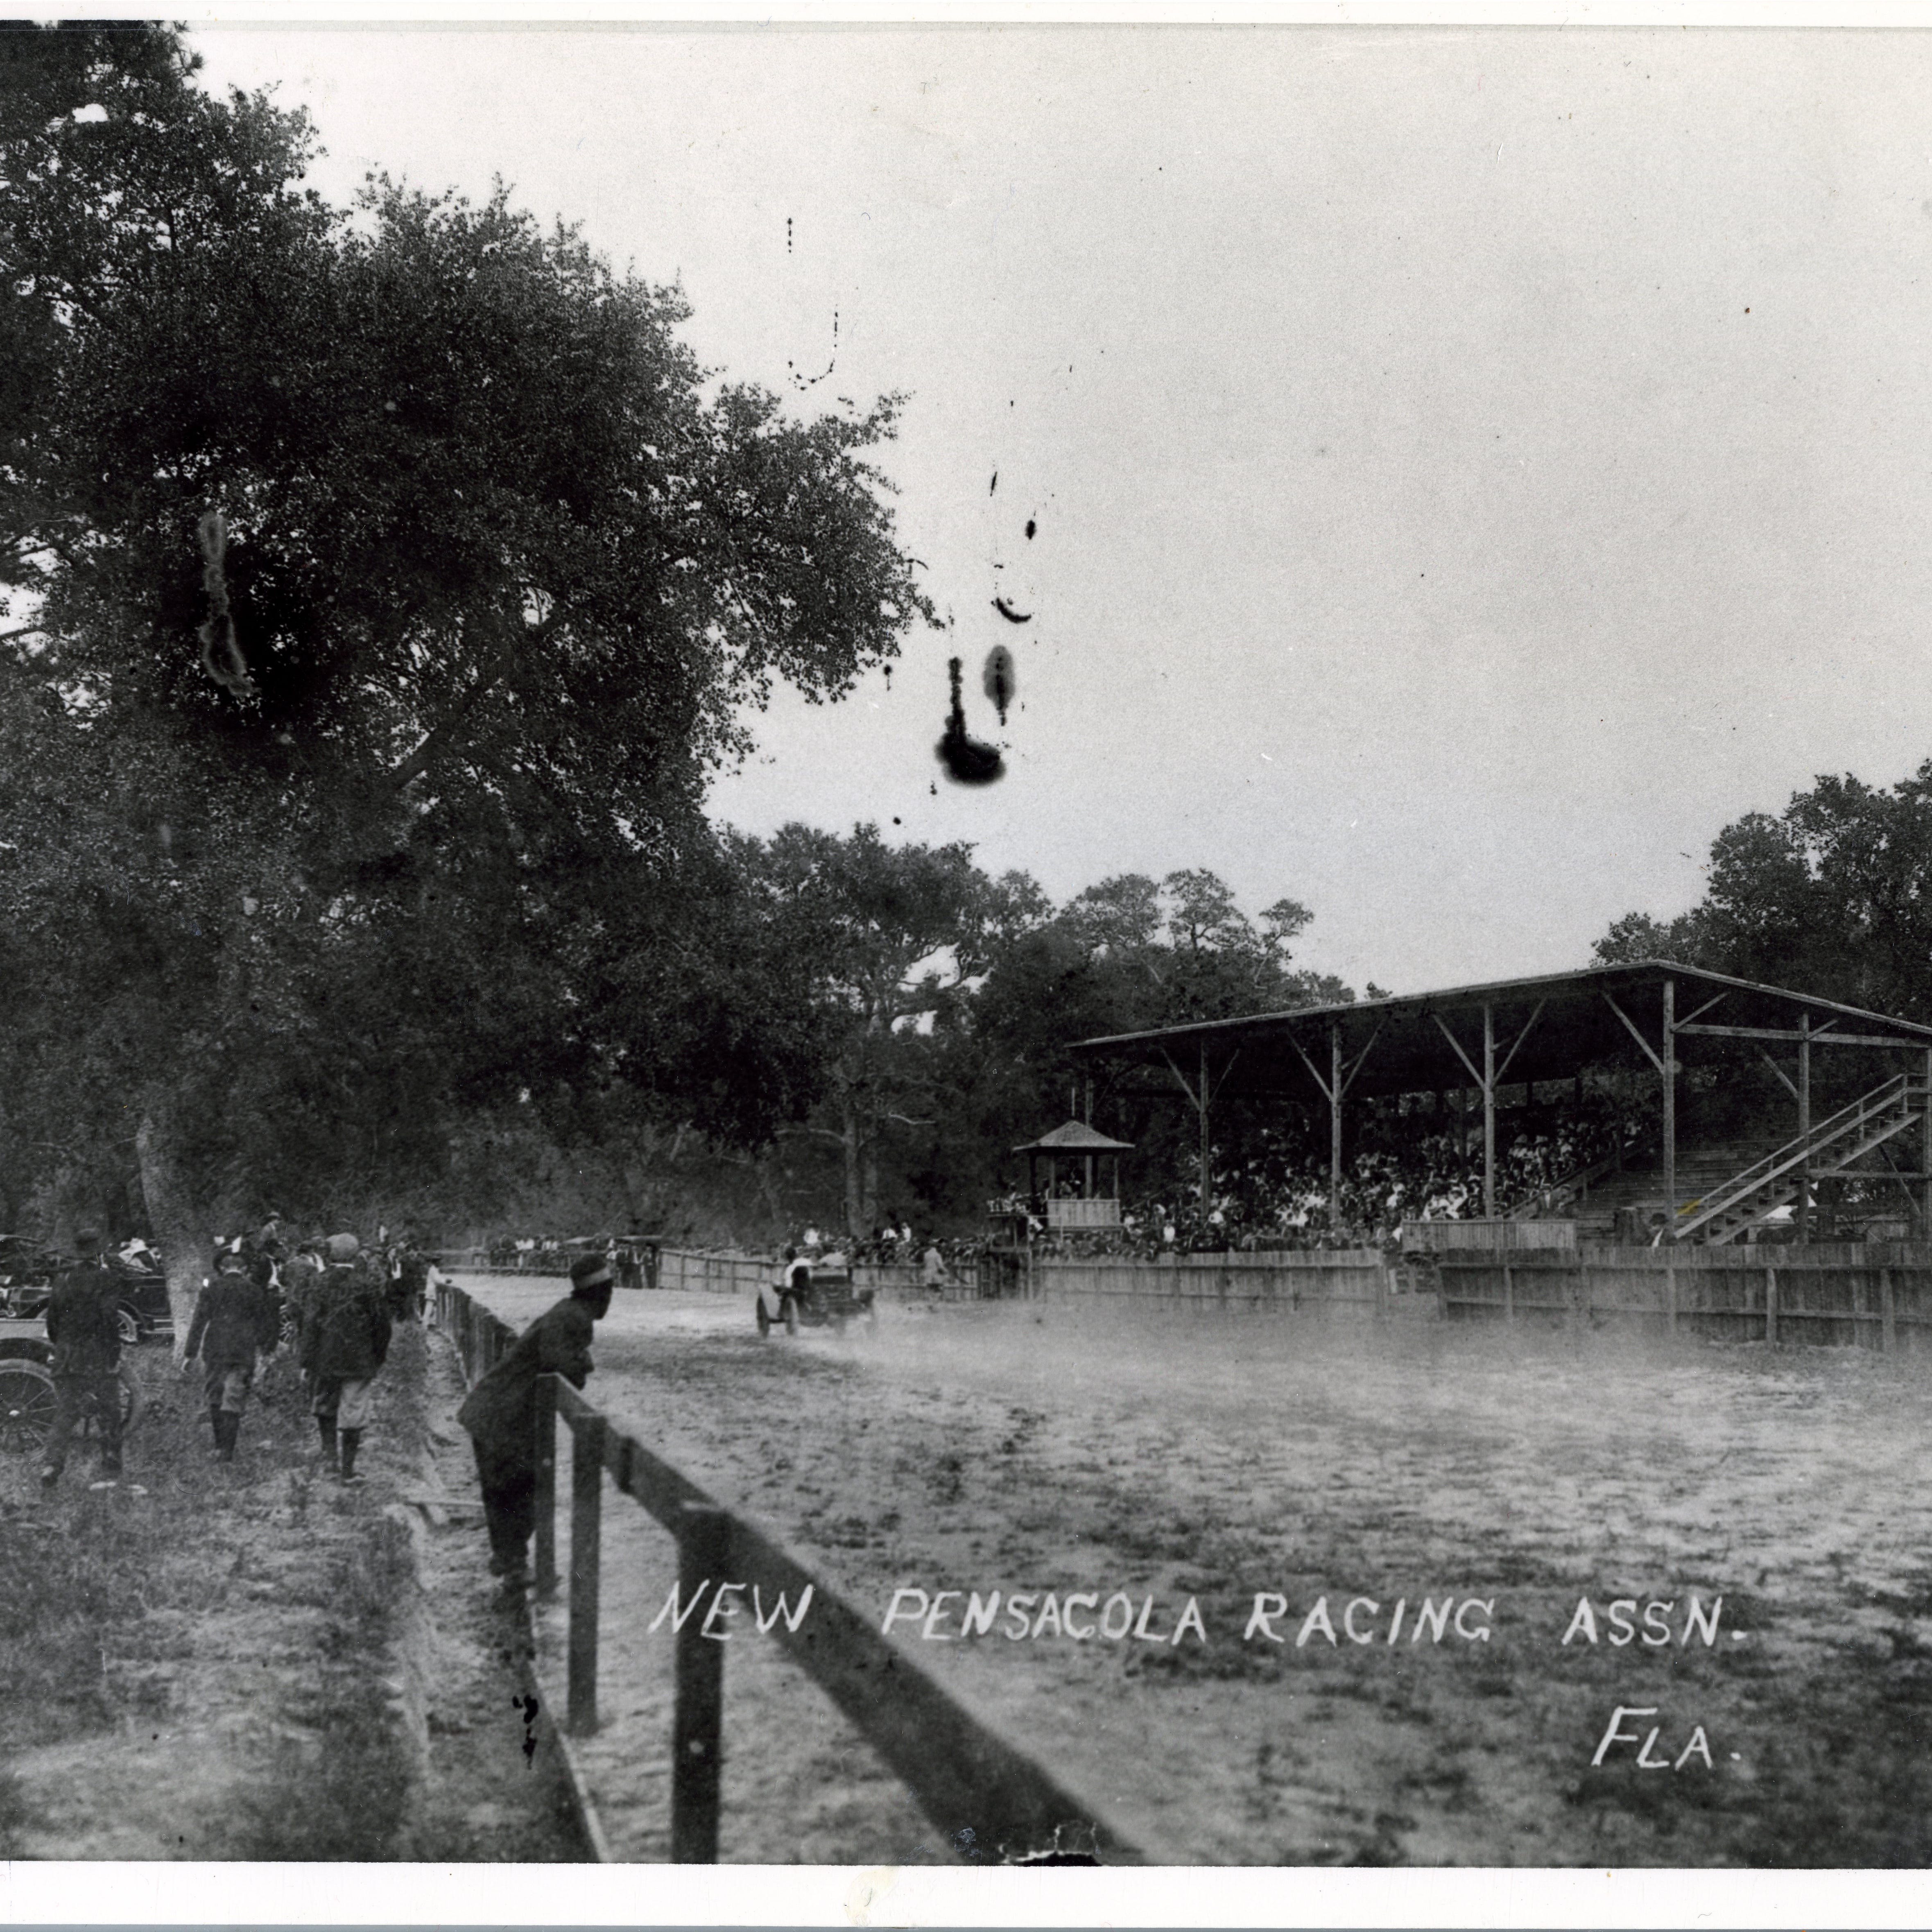 The popularity of Kupfrian's Park waned after the founder’s death in 1892. The park made a short comeback in 1910 when the new owners introduced automobile races.